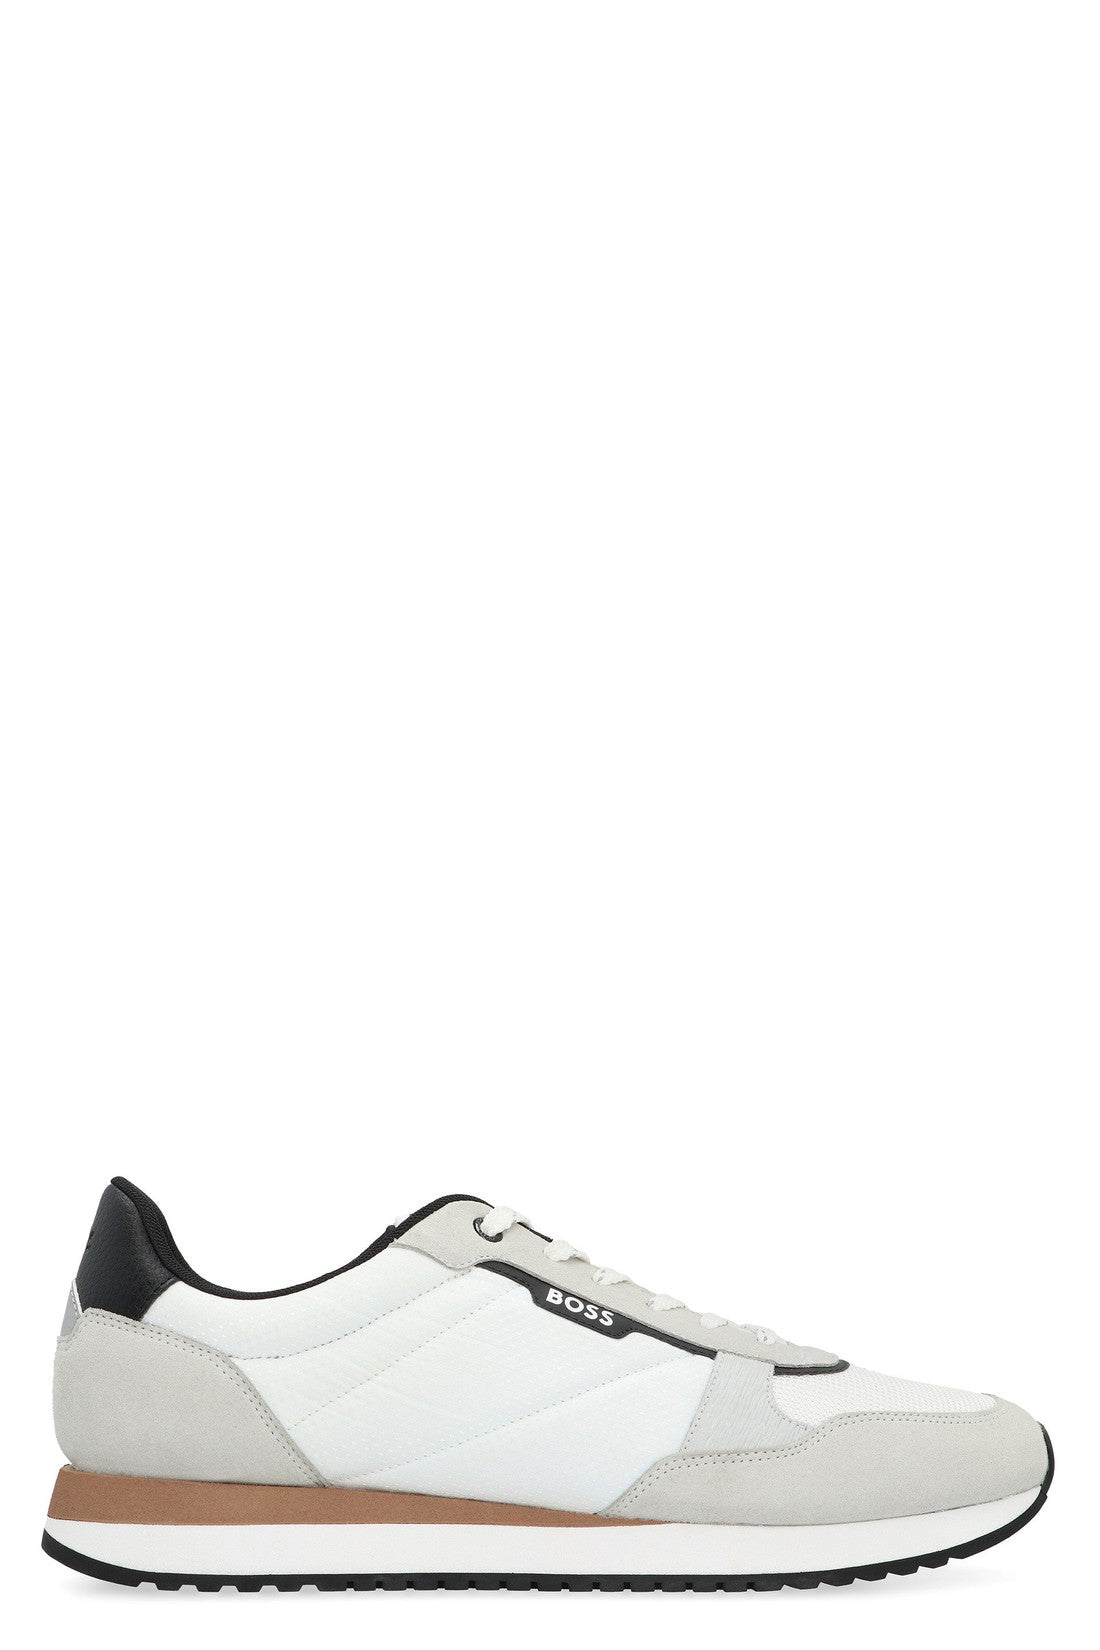 BOSS-OUTLET-SALE-Kai Fabric low-top sneakers-ARCHIVIST